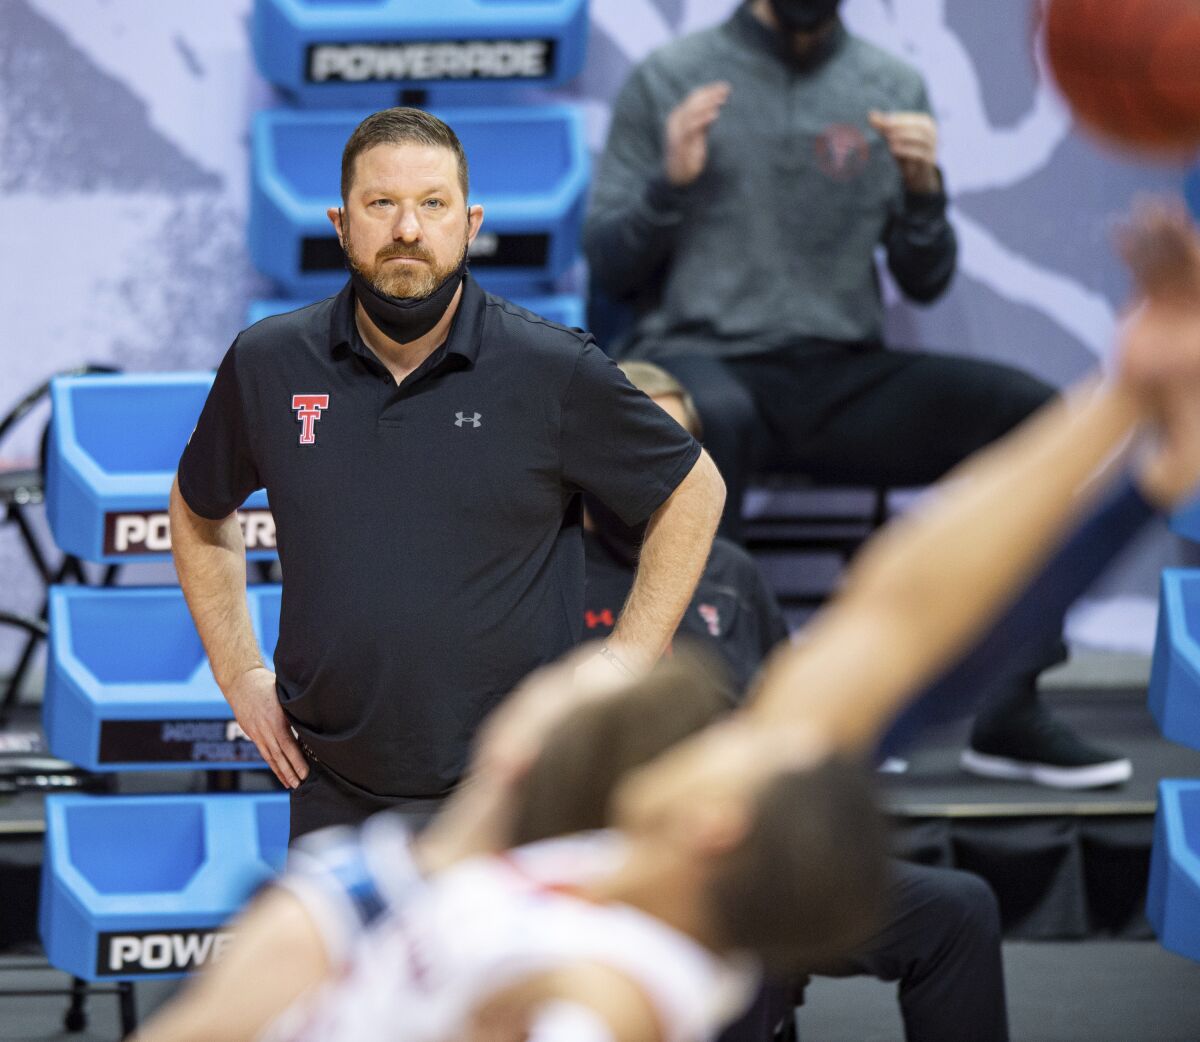 Texas Tech head coach Chris Beard watches the action on the court from the sideline during the first half of a first round game against Utah State in the NCAA men's college basketball tournament, Friday, March 19, 2021, in Bloomington, Ind. (AP Photo/Doug McSchooler)